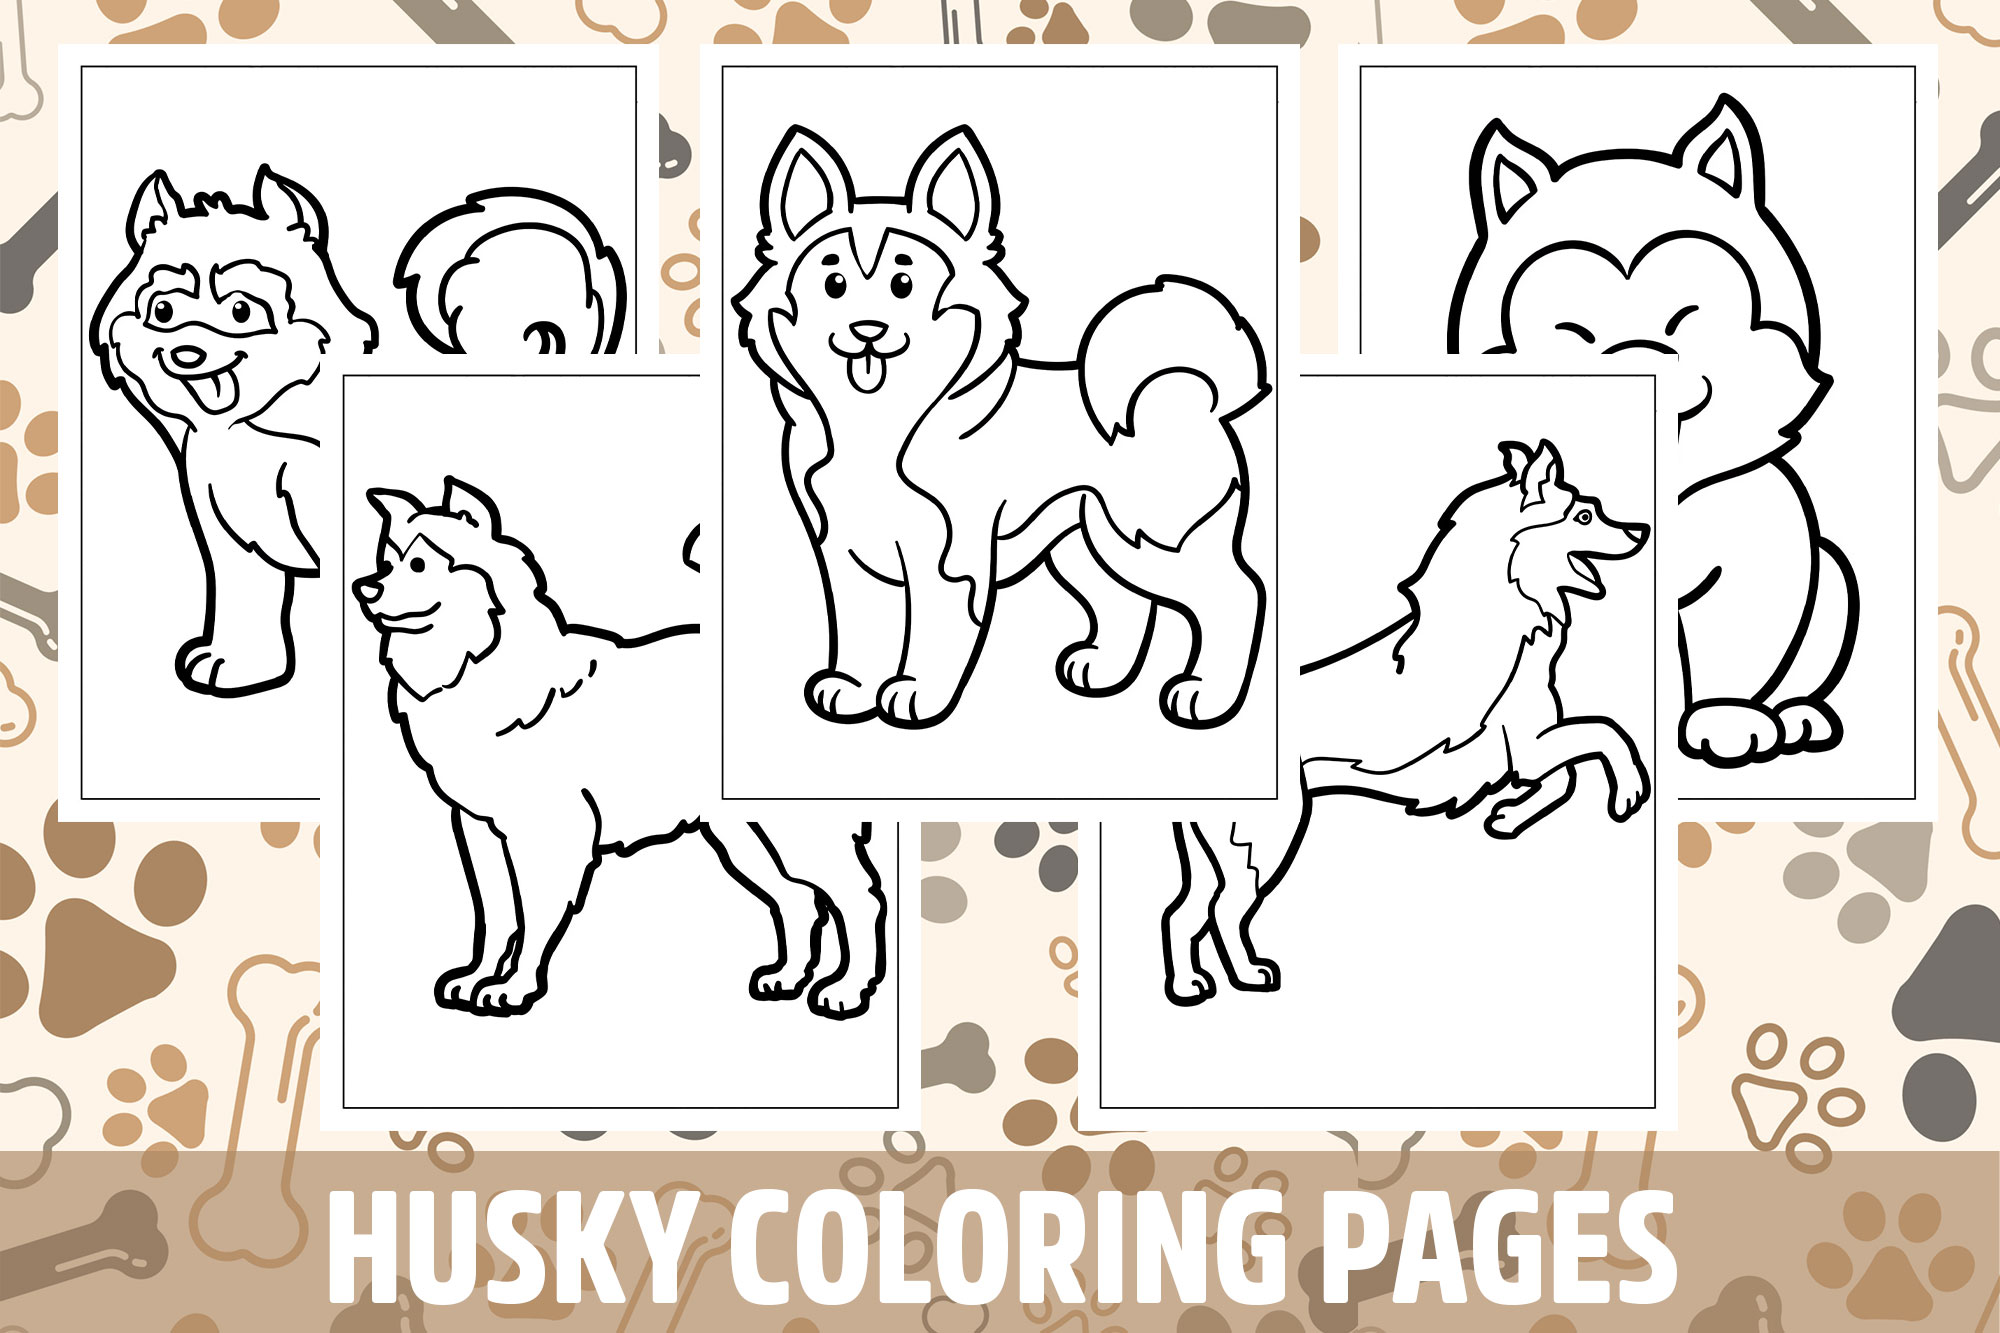 Husky coloring pages for kids girls boys teens birthday school activity made by teachers